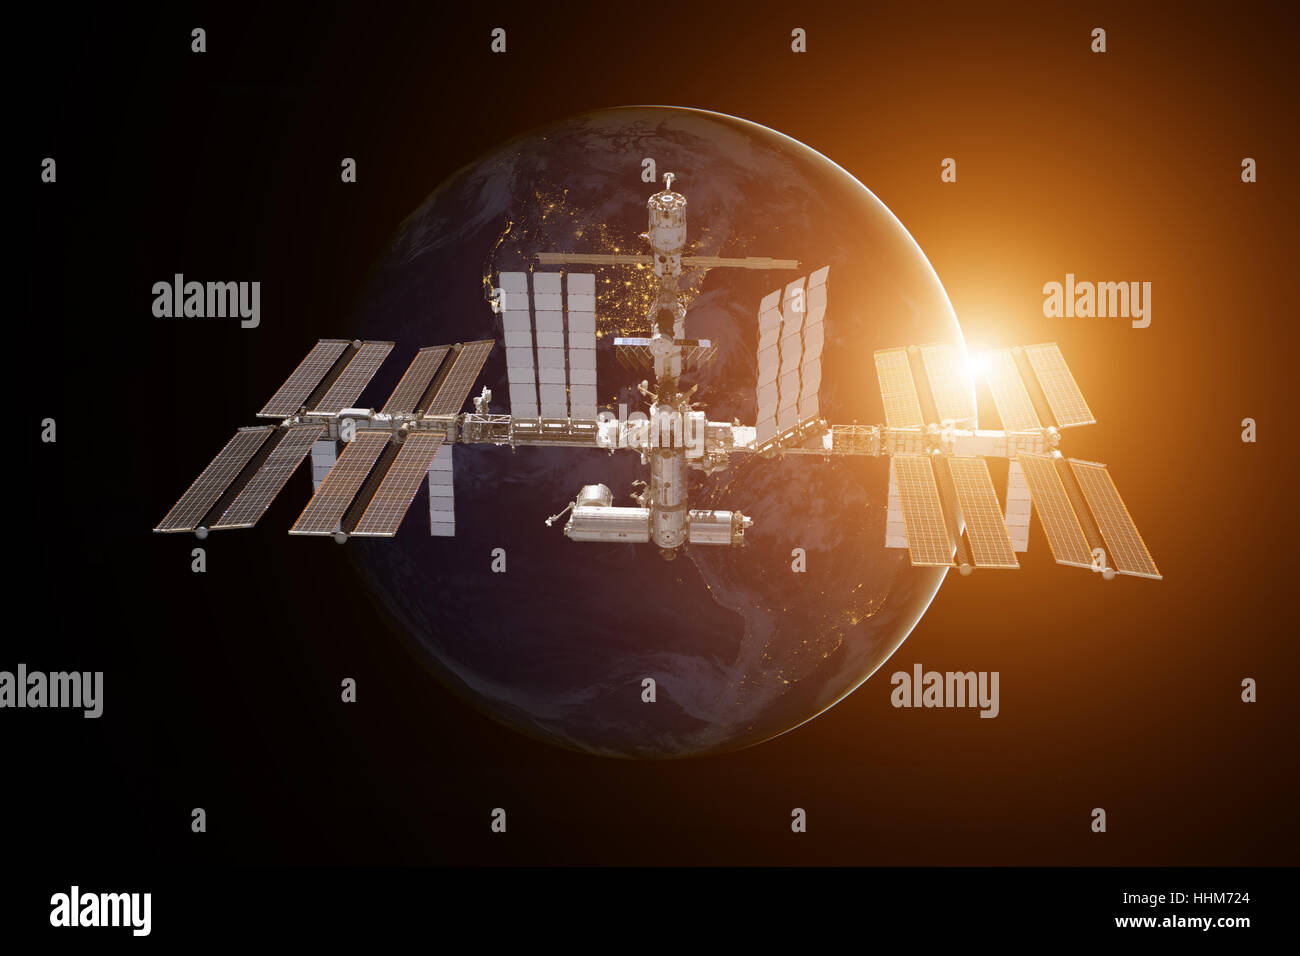 International Space Station over the planet Earth. Elements of this image furnished by NASA. Stock Photo